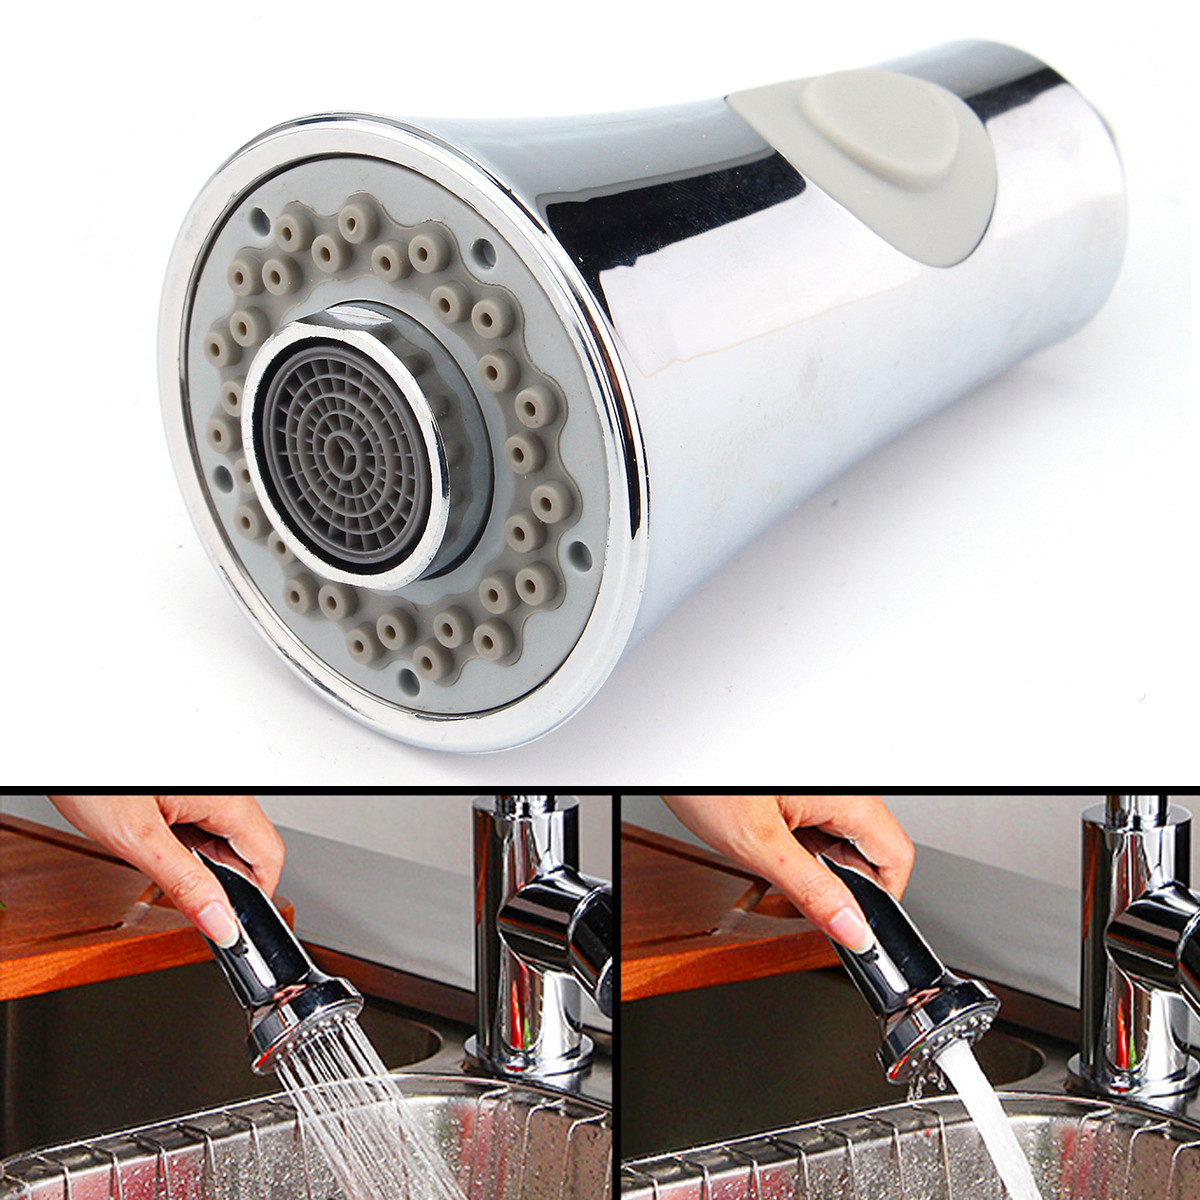 ABS-Plastic-Kitchen-Sink-Faucet-Pull-Down-Steel-Replacement-Spray-Shower-Head-1336144